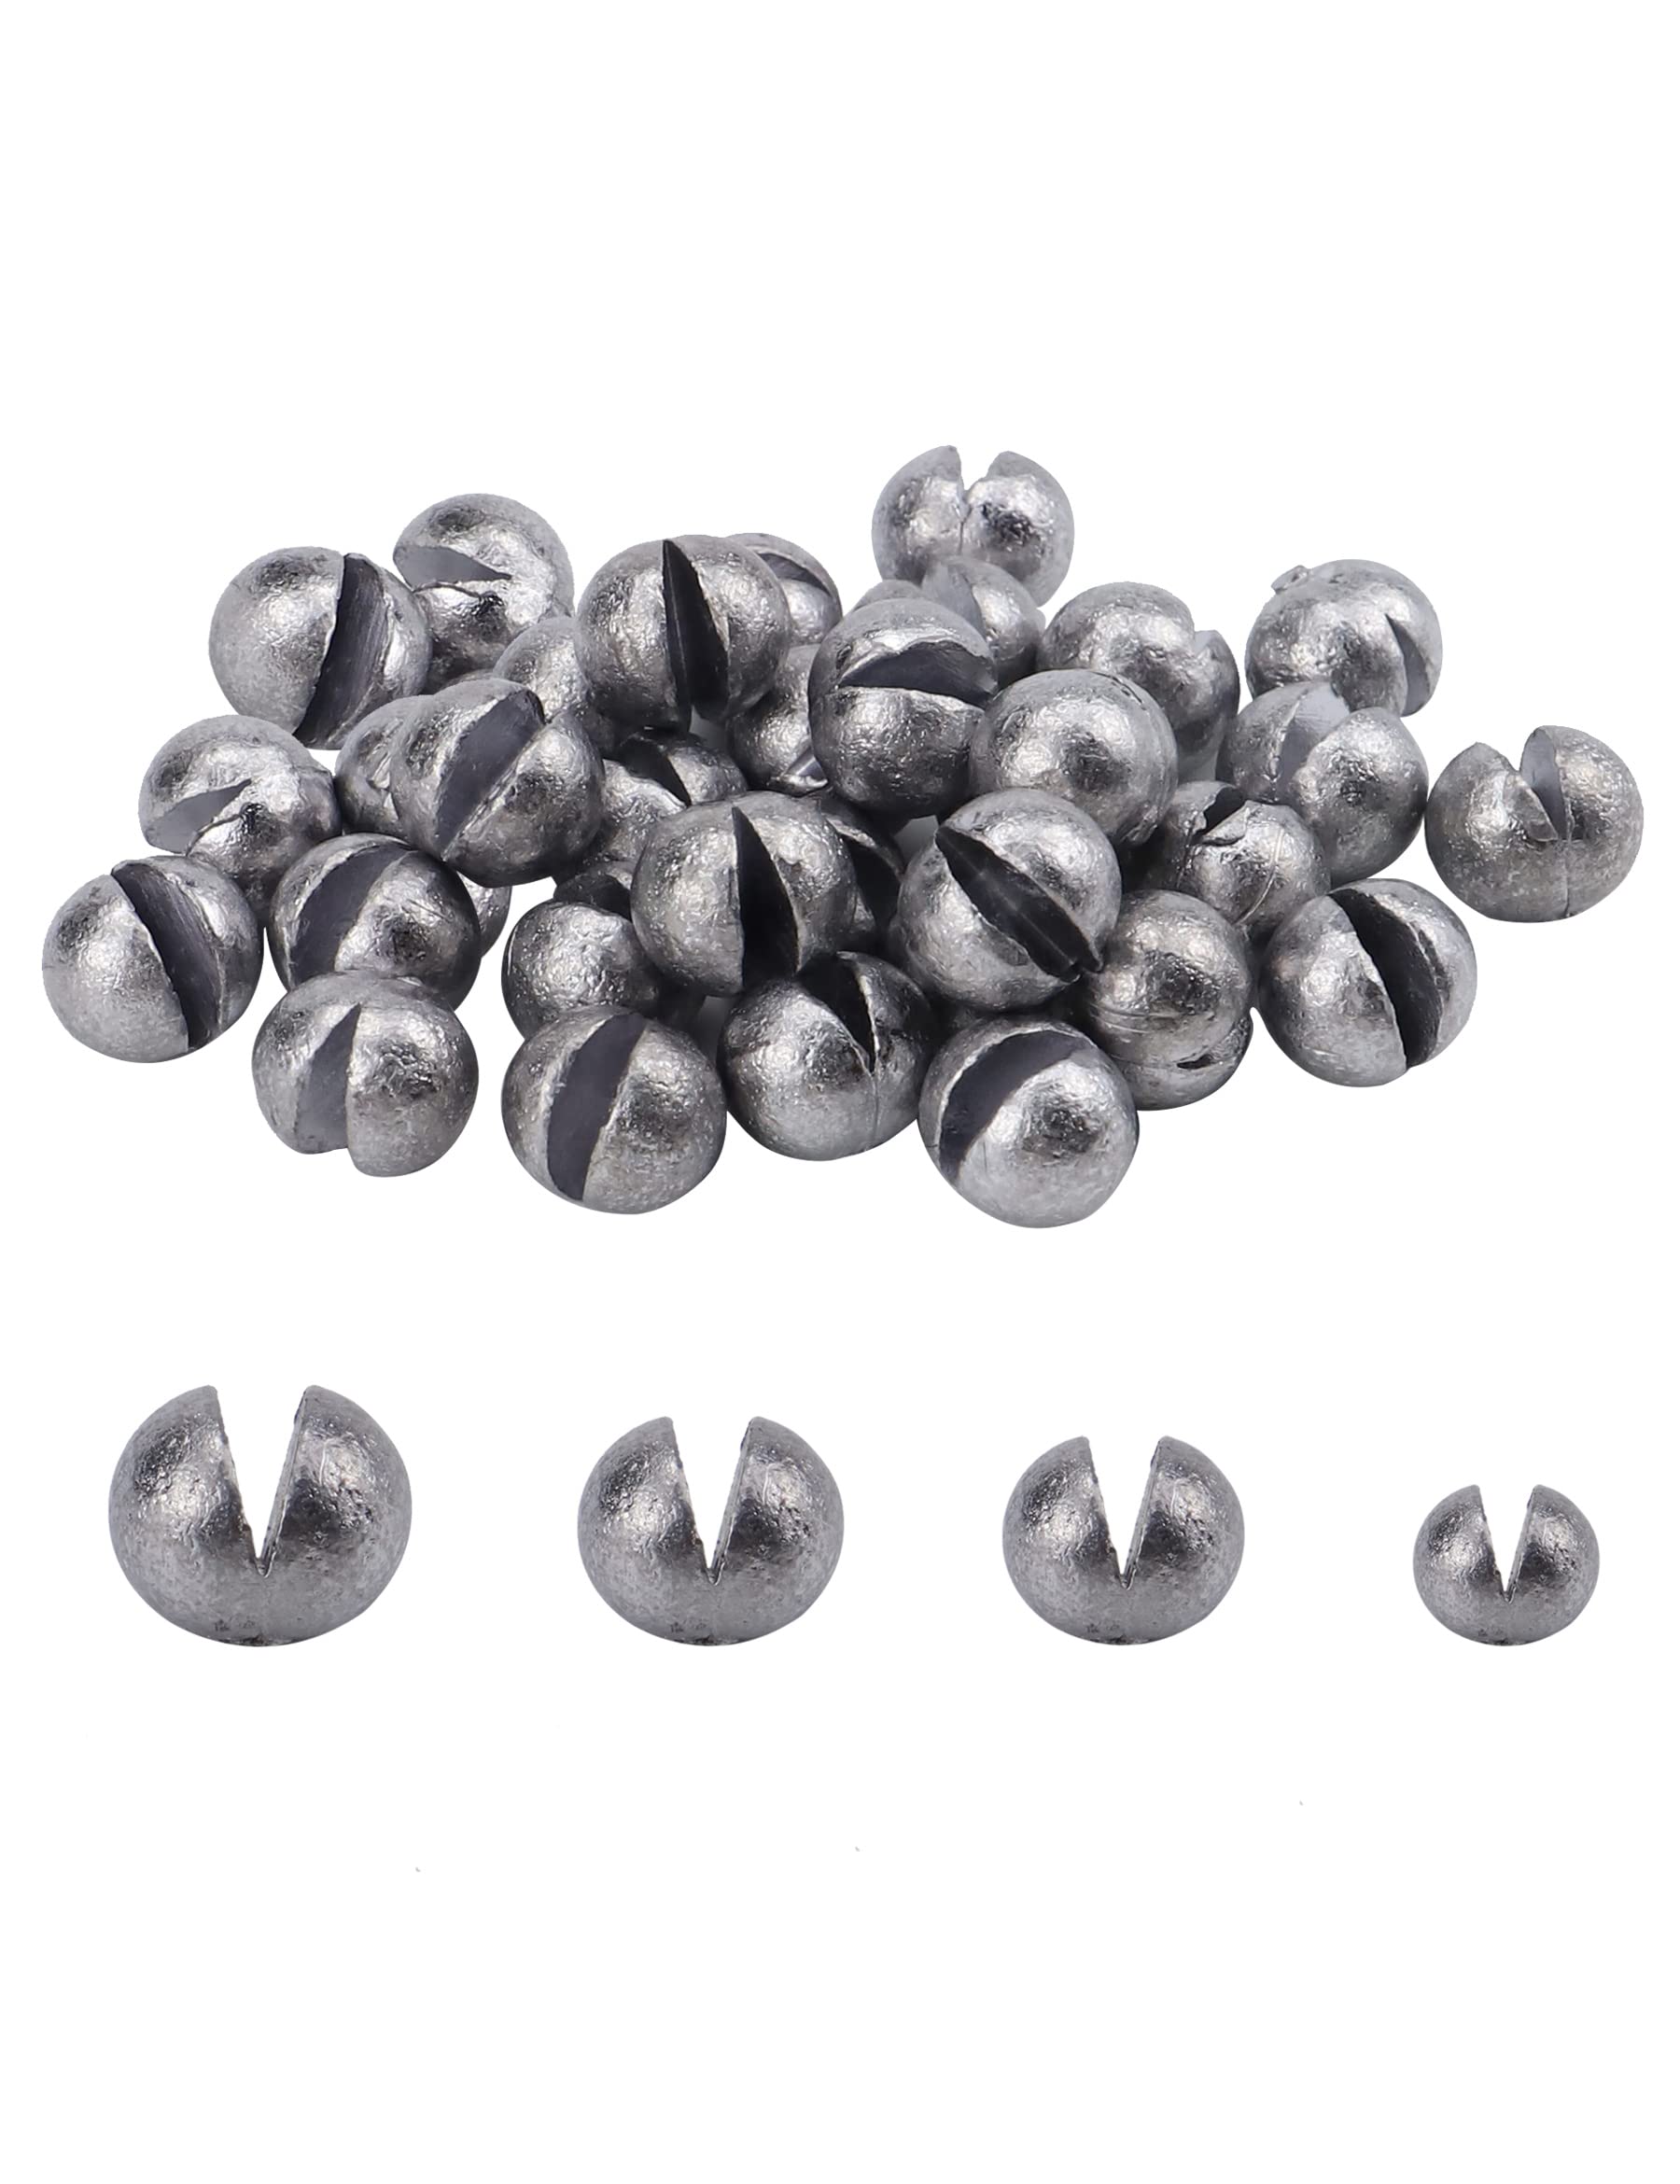 Avlcoaky Fishing Weights Sinkers Assortment, 110pcs Round Split Shot  Fishing Weights Freshwater, Removable Fishing Line Weights